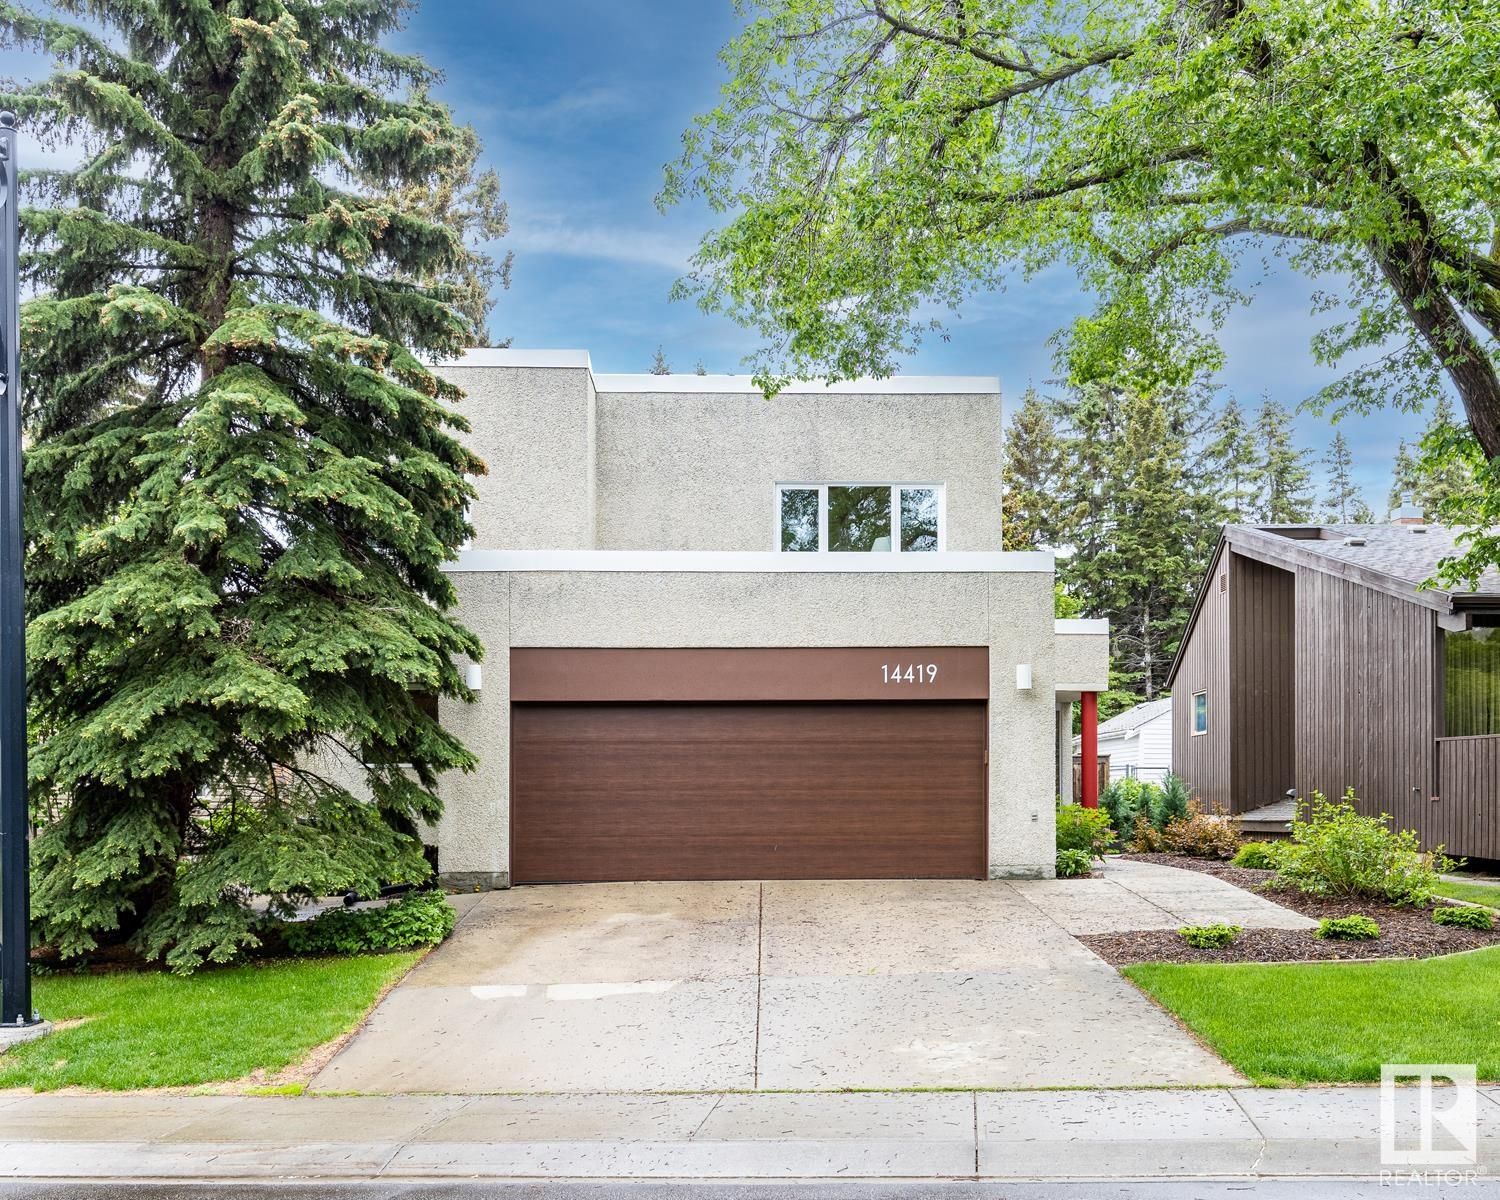 Main Photo: 14419 SUMMIT DR NW in Edmonton: Zone 10 House for sale